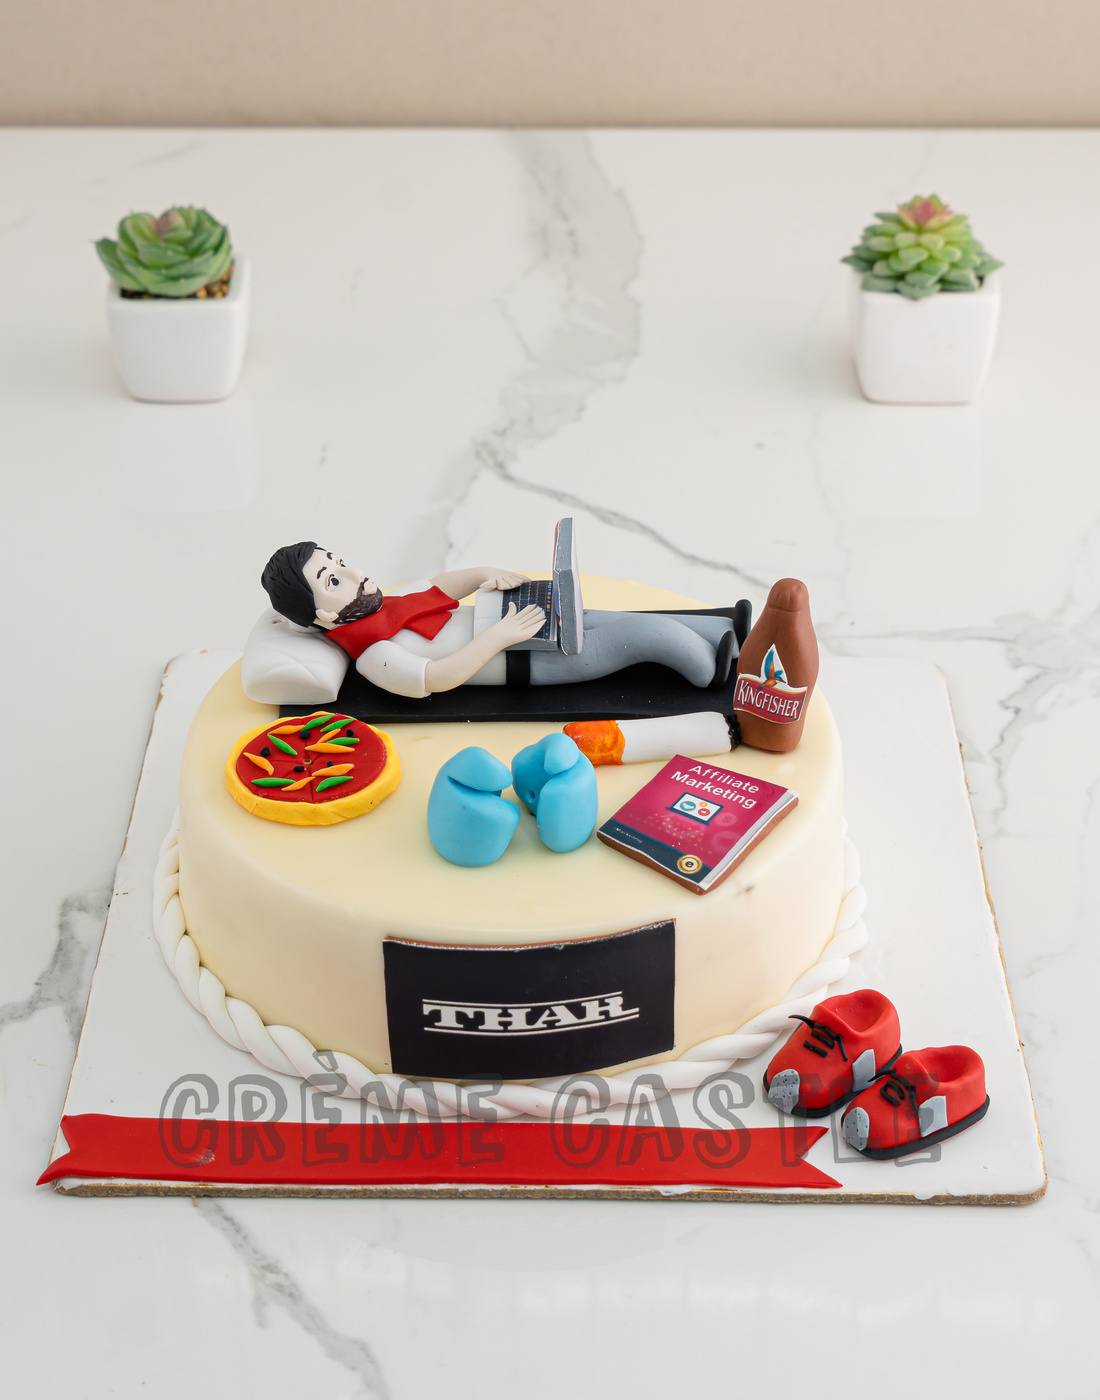 Indulge in Bedroom Bliss: Birthday Cake with Fondant Icing | UG Cakes